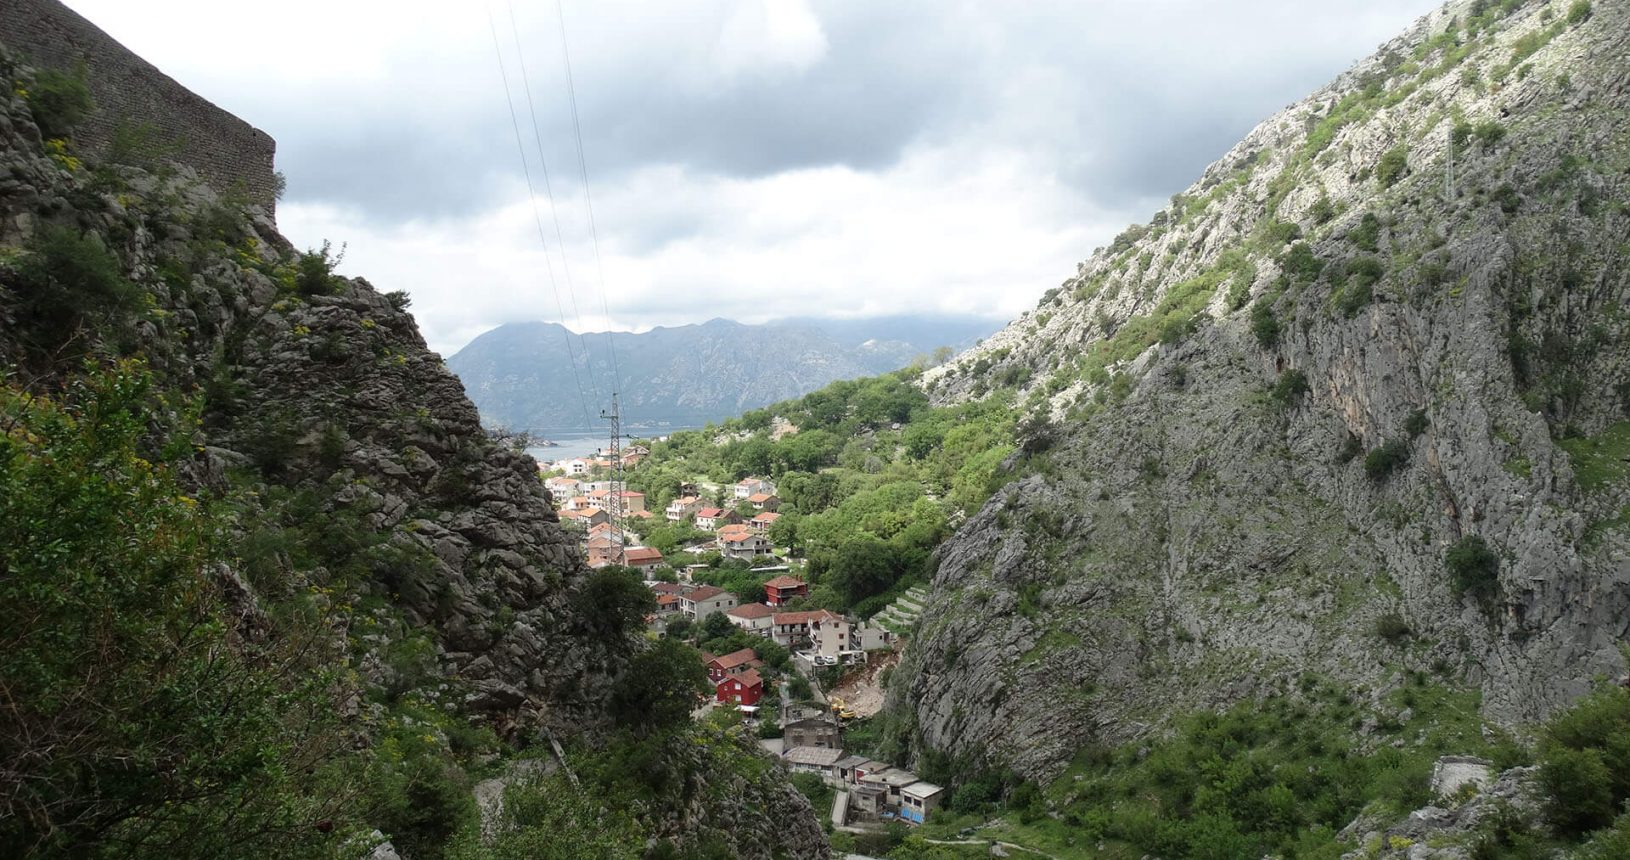 The route to Kotor Fortress